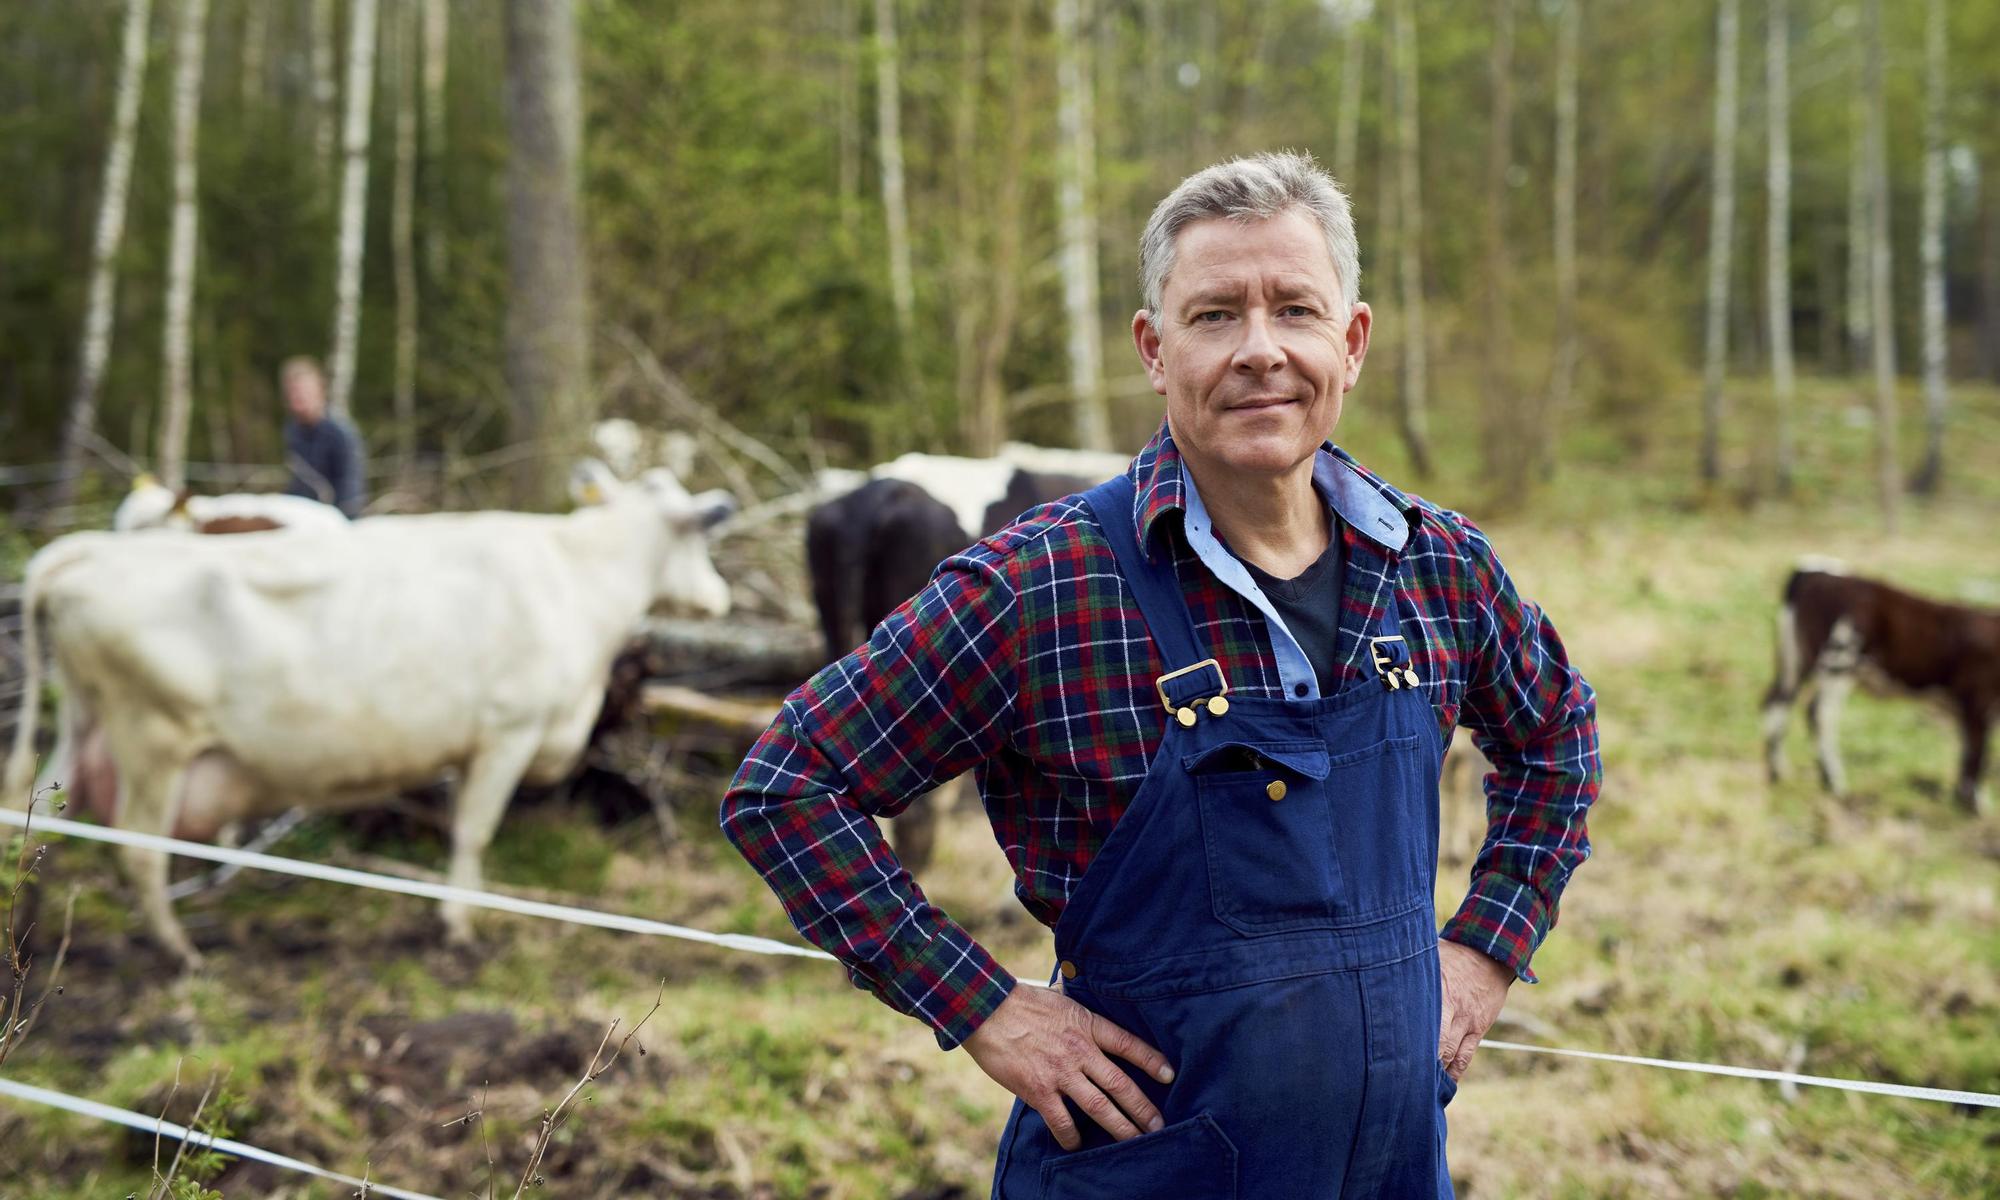 Male farmer with cows